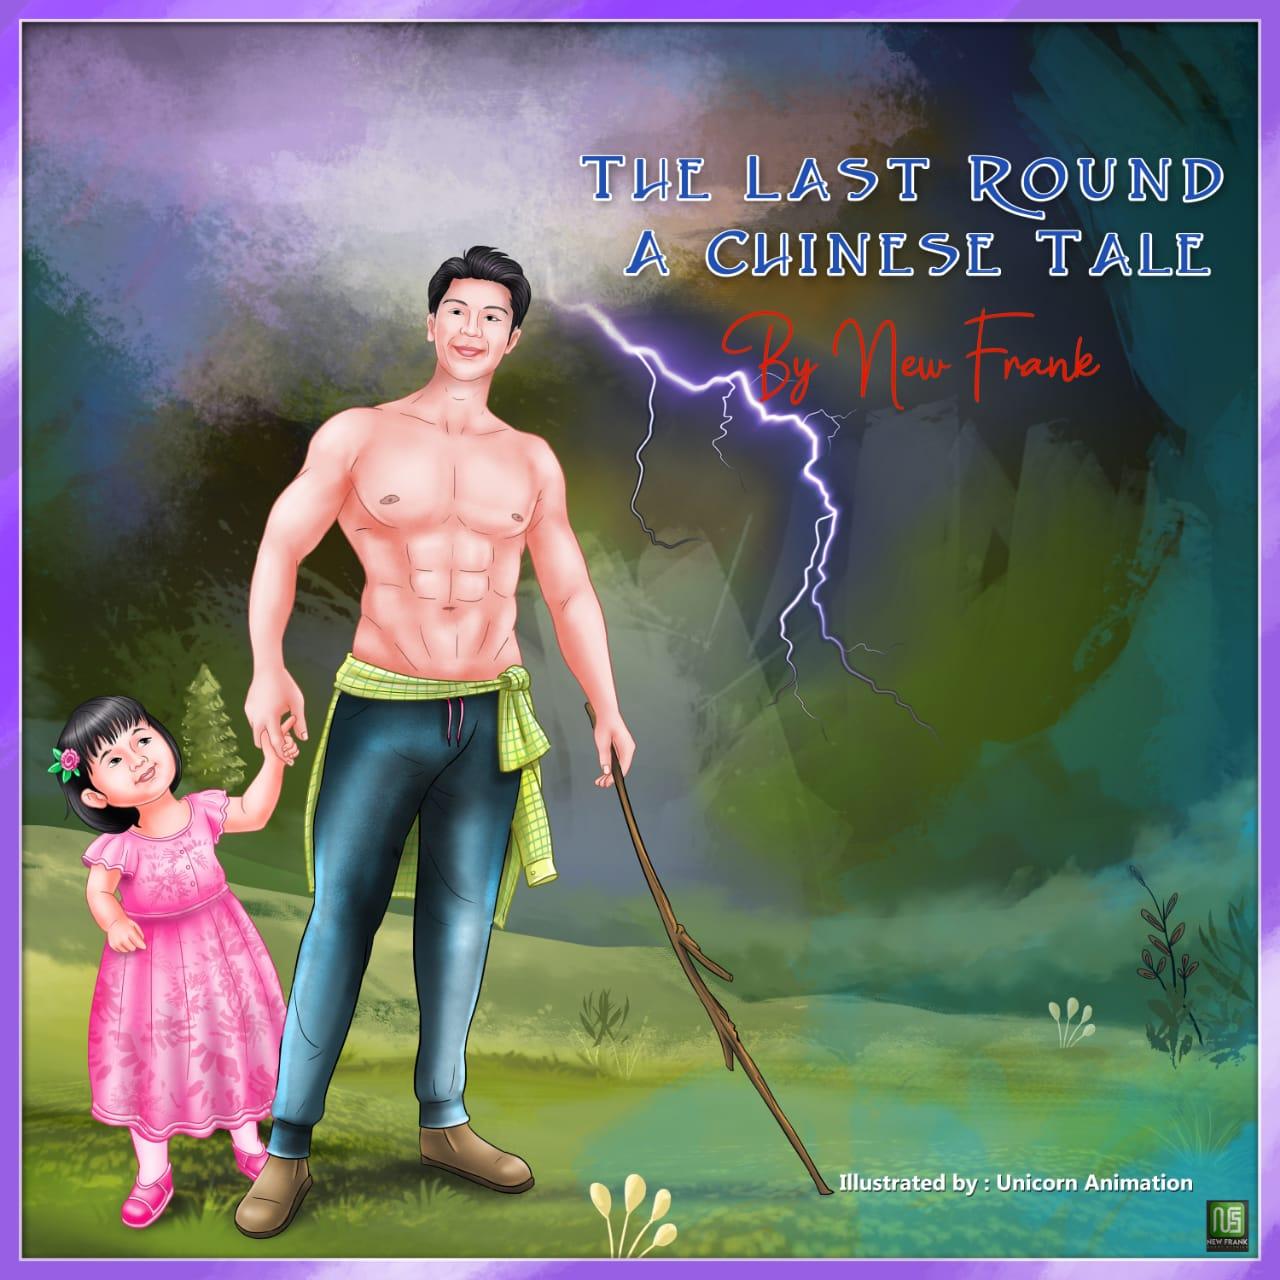 The Last Round A Chinese Tale – By New Frank